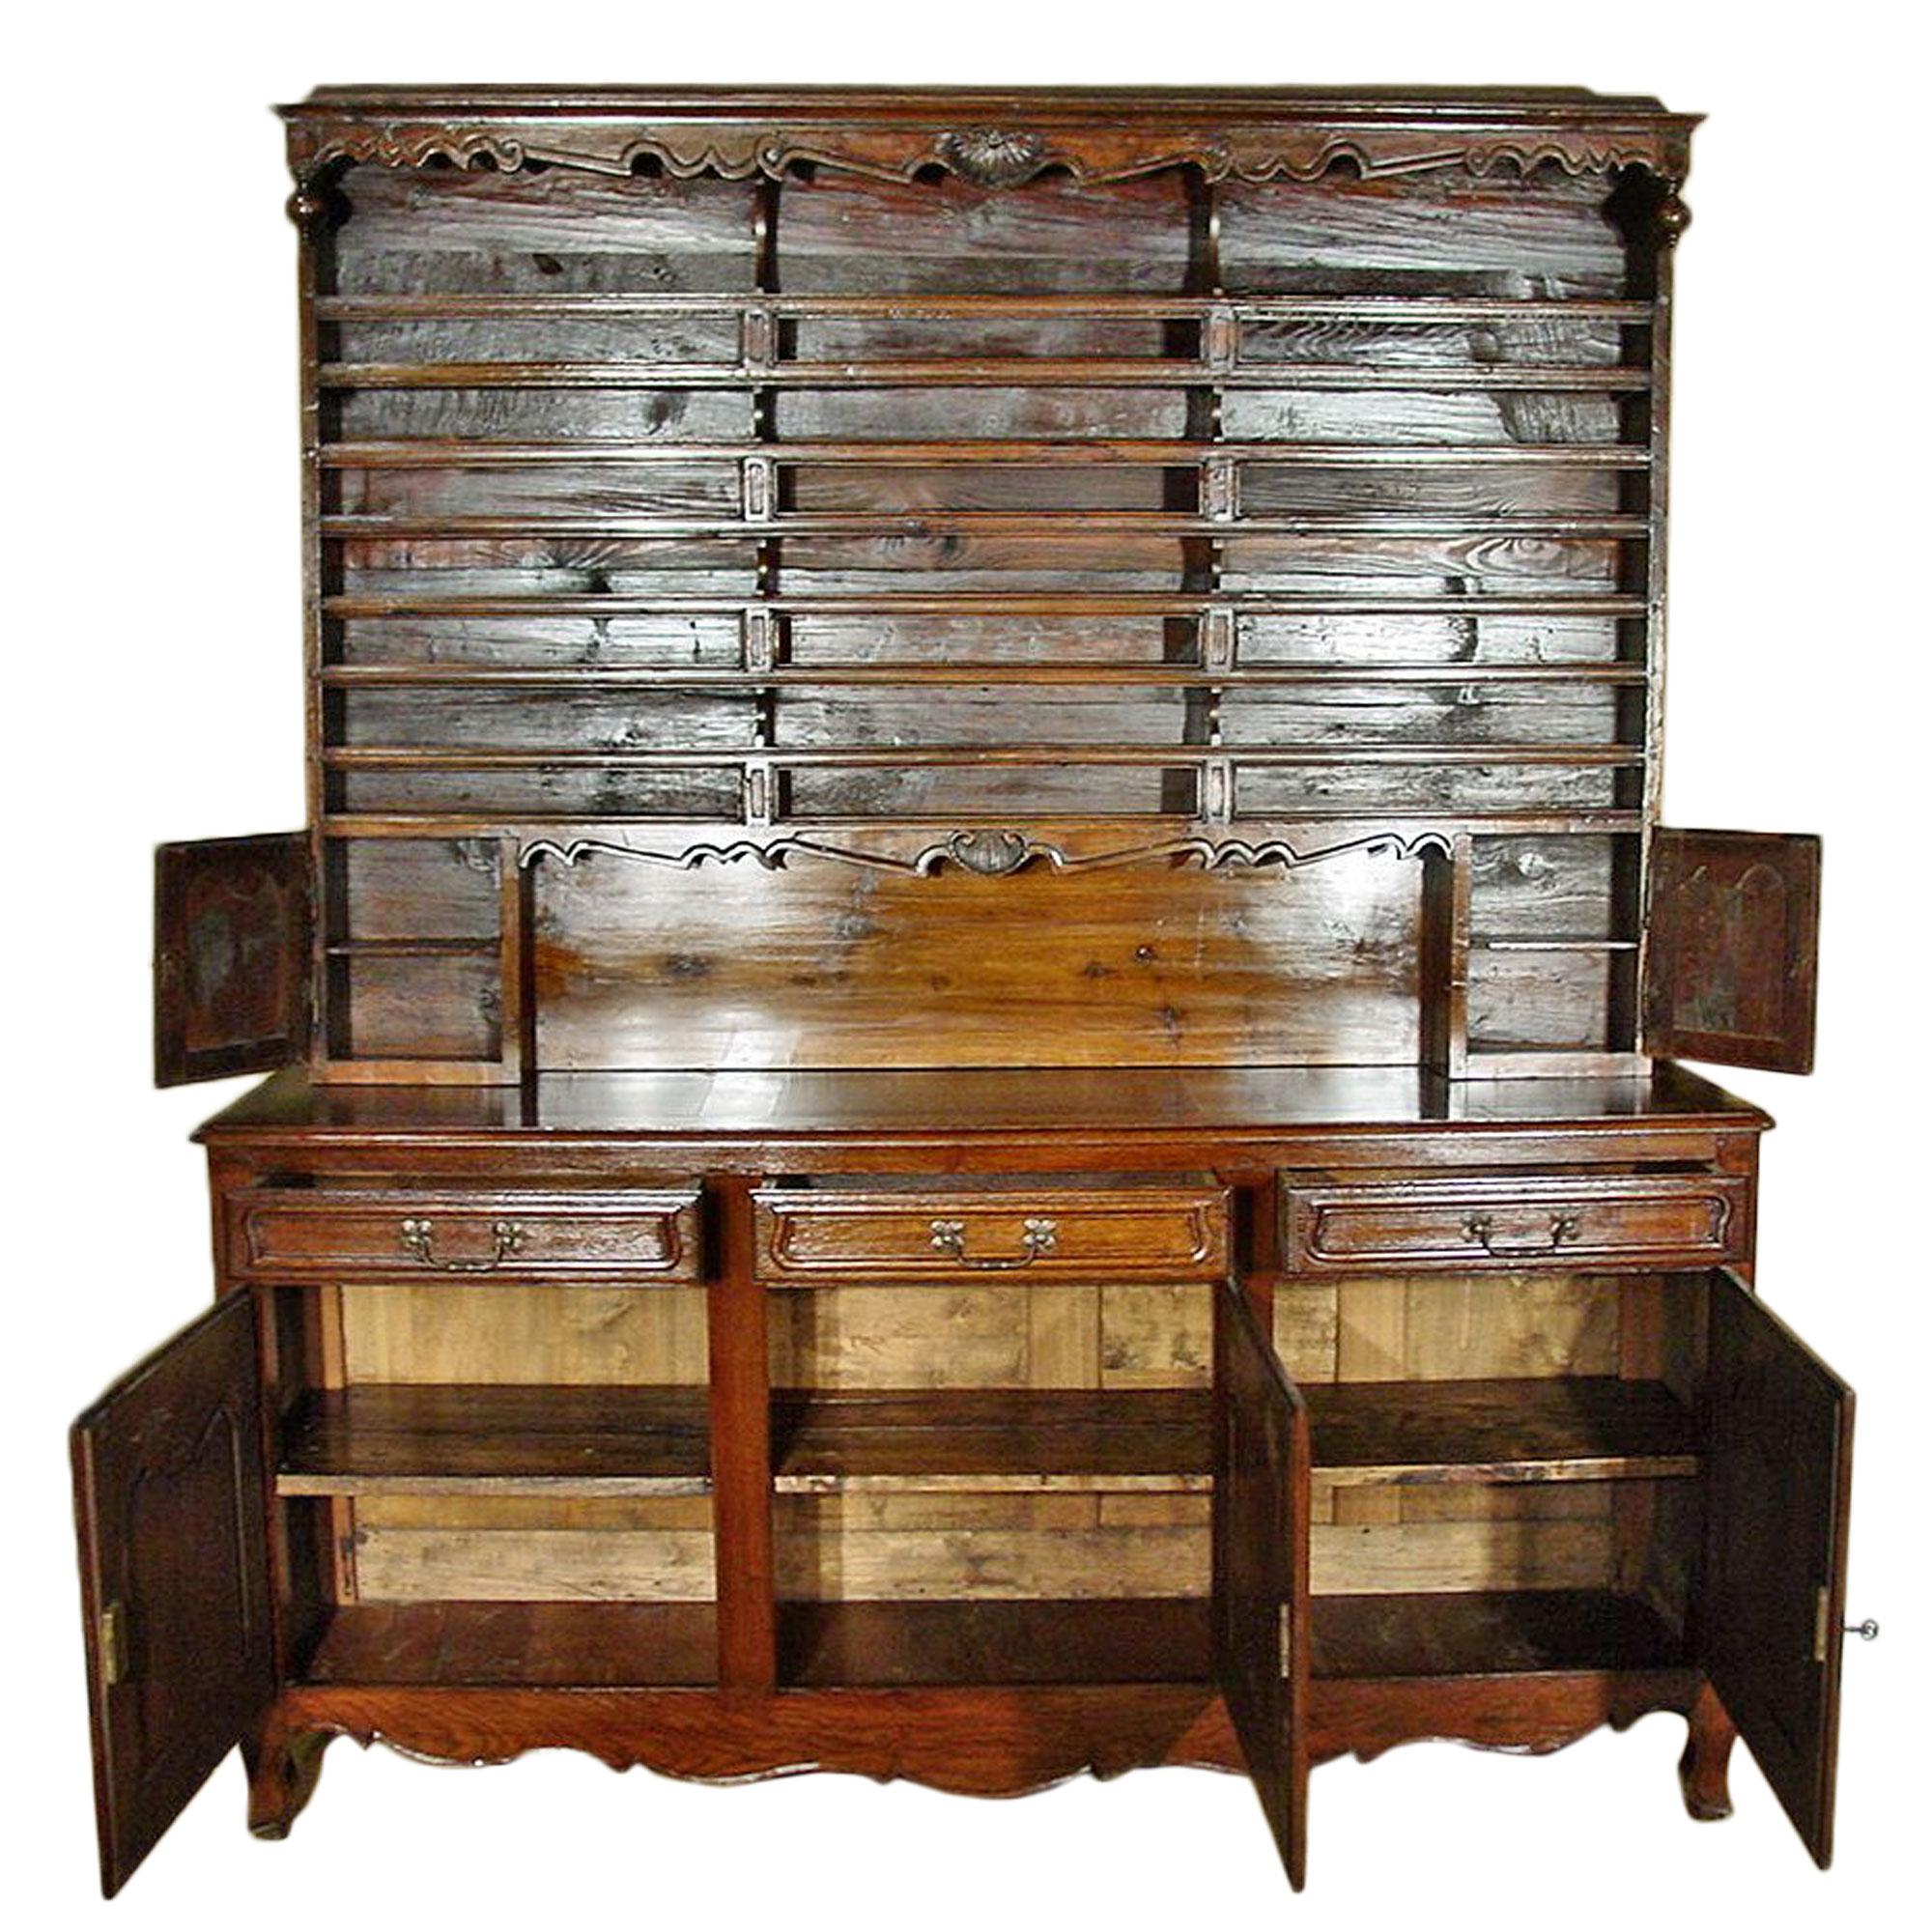 A charming country French mid 19th century Louis XVI st. oak 'Vaissellier'. The buffet has a scalloped apron below three doors with impressive original hardware. Above are three drawers. The doors and drawers all have a scrolled moulded design.